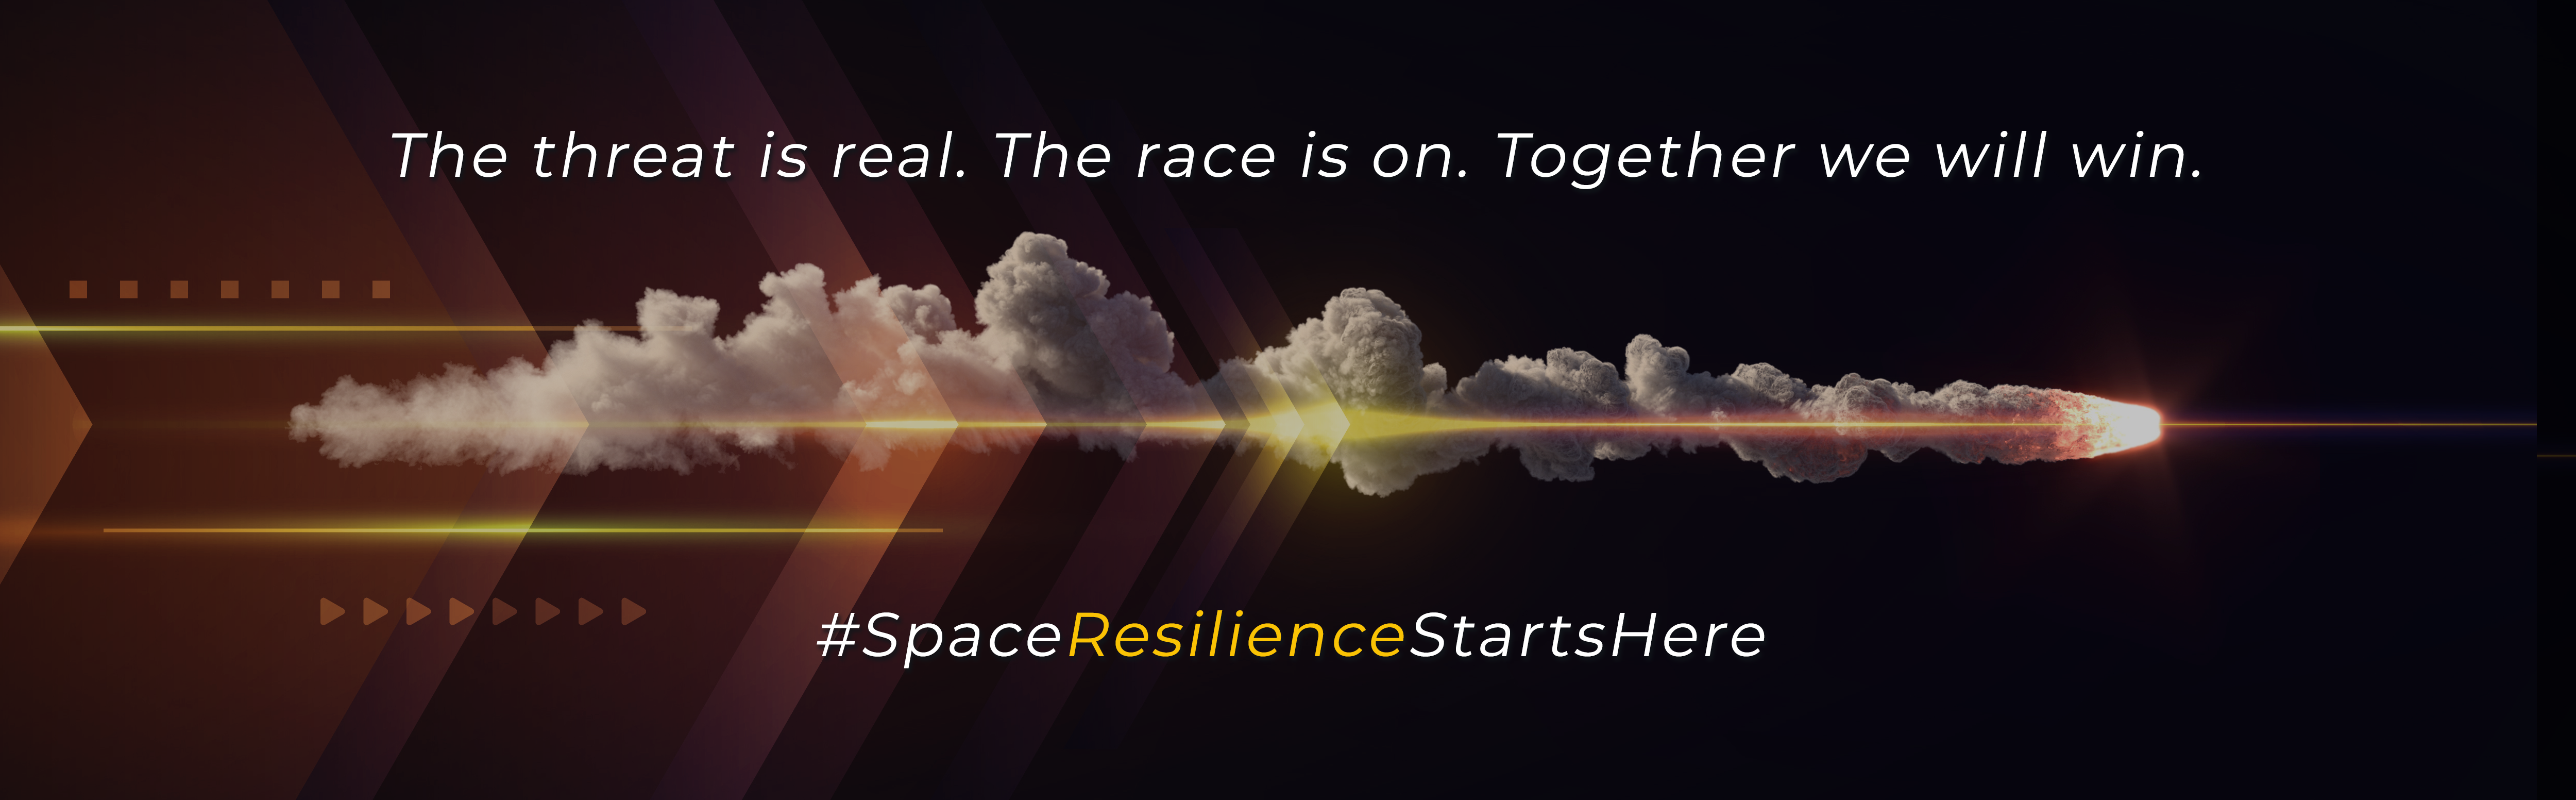 Space resilience starts here graphic